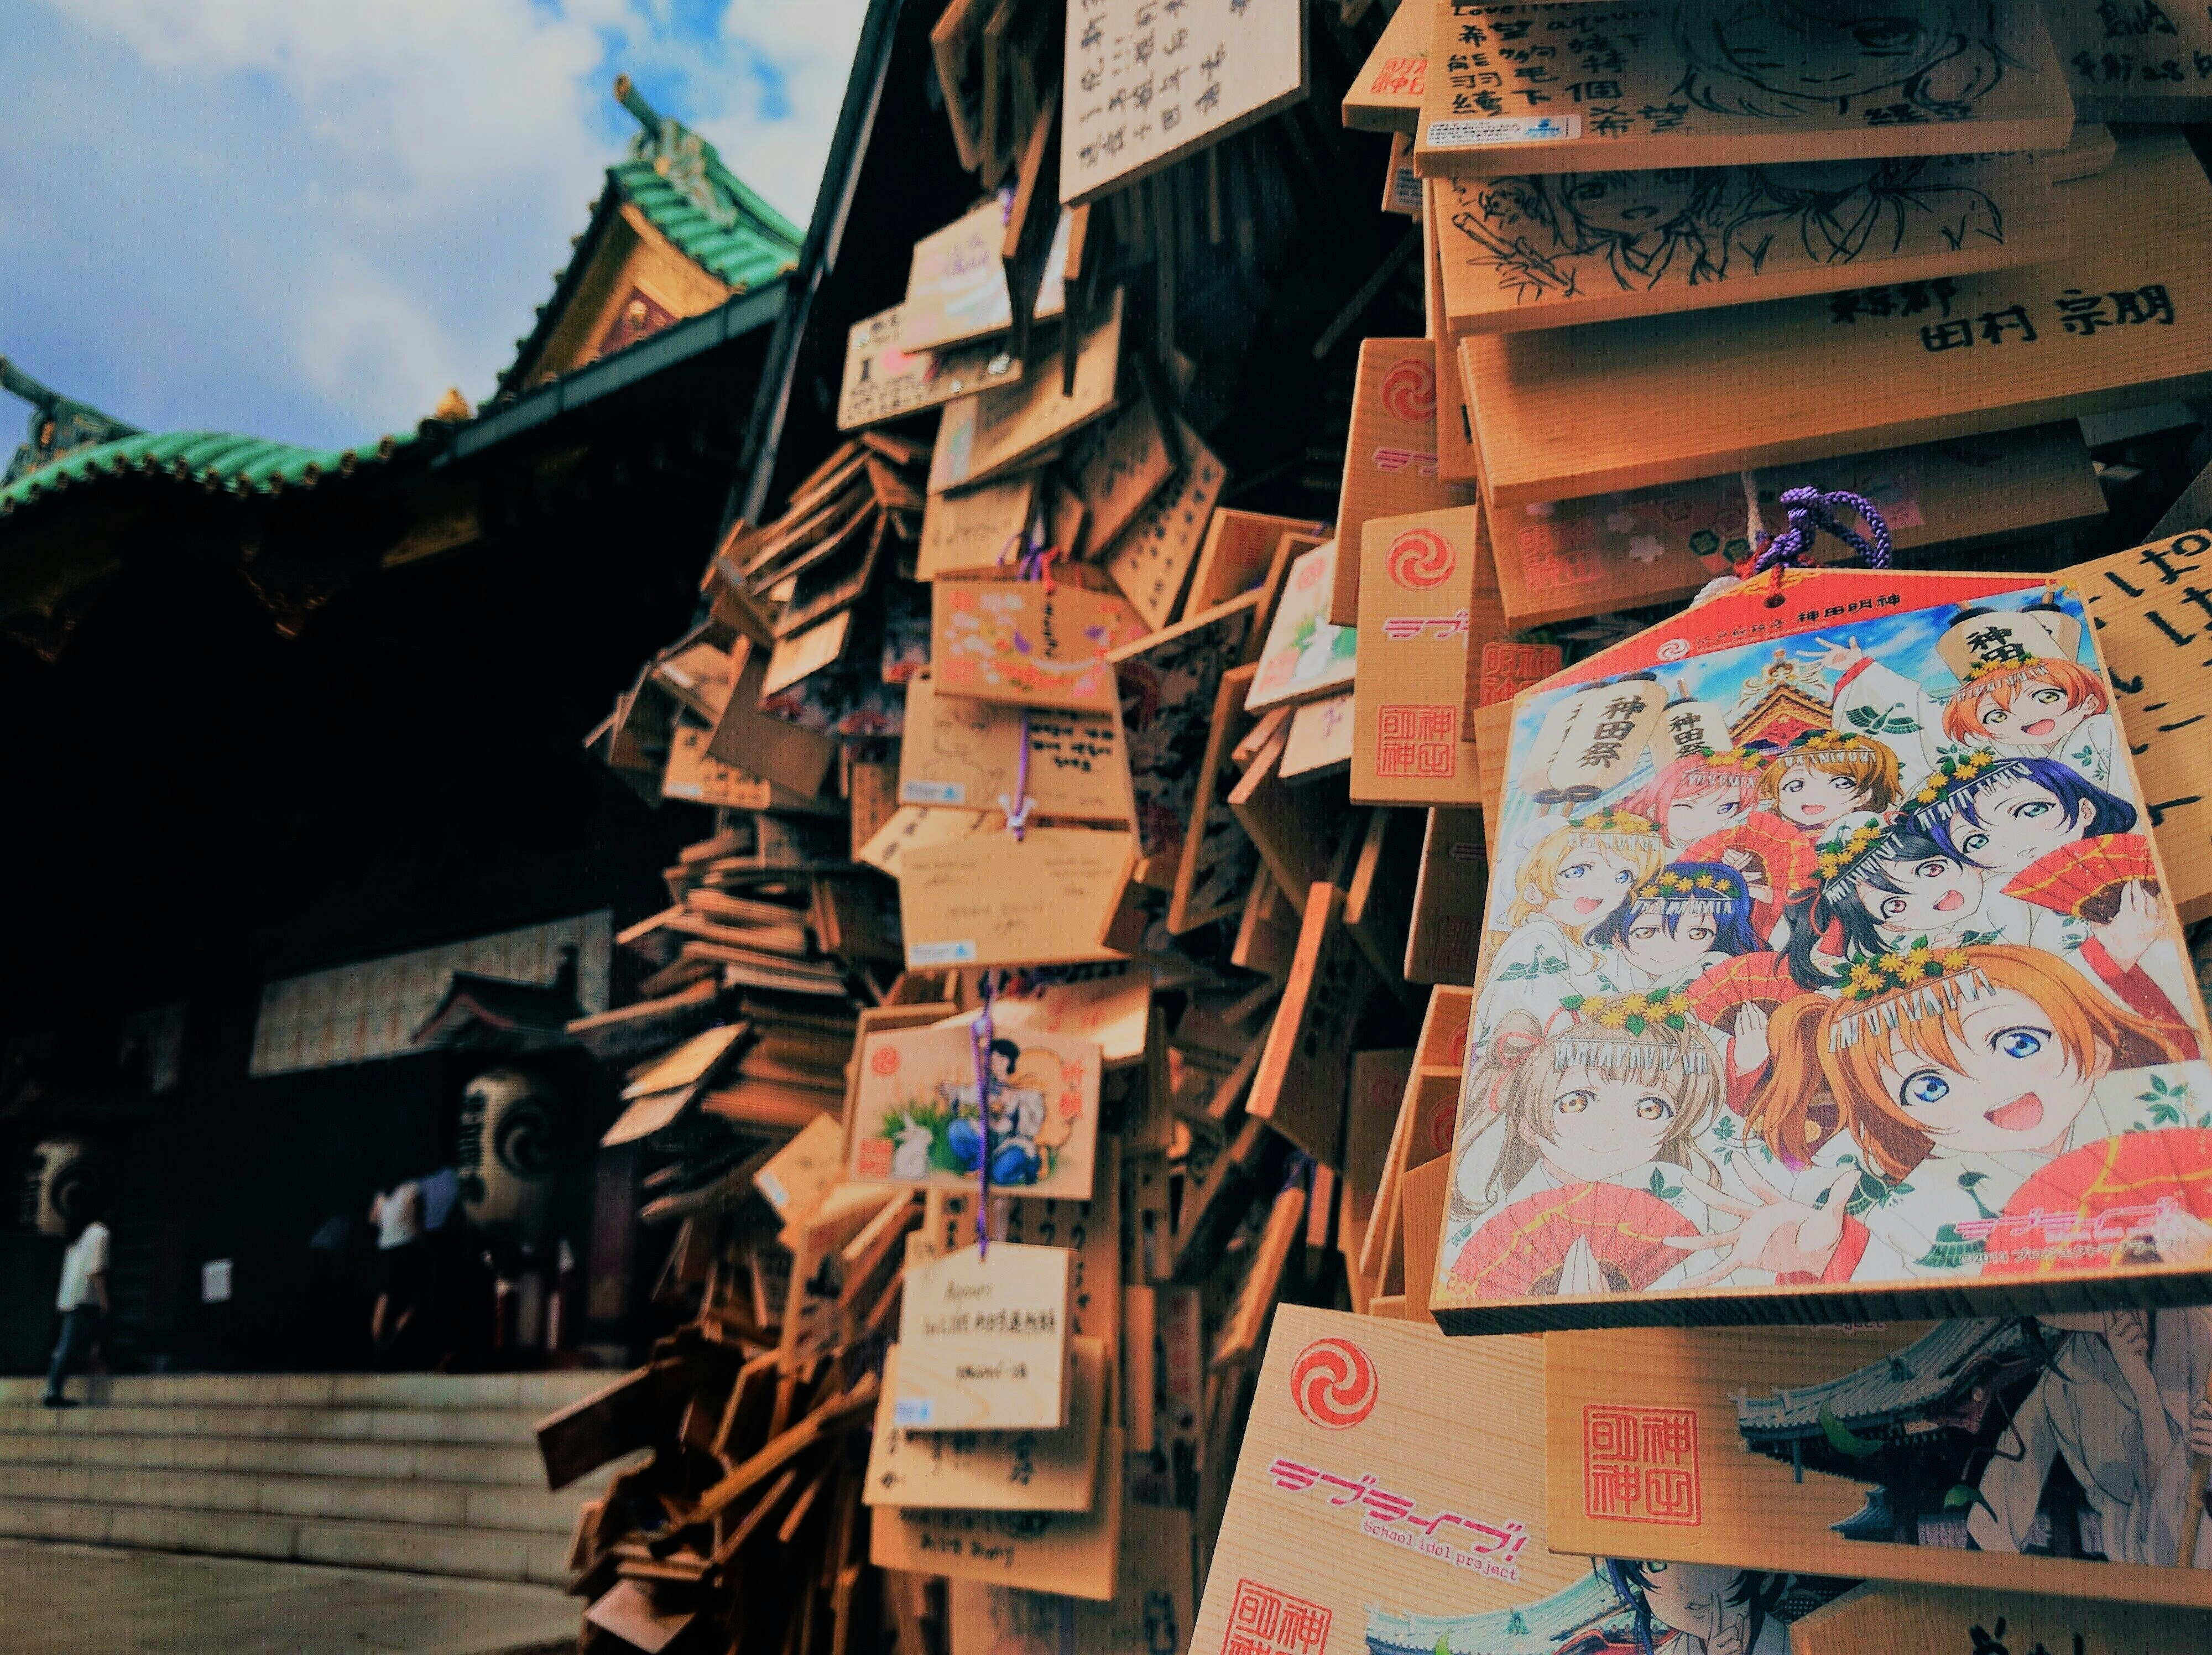 Taken in Kanda Myoujin Shrine, Tokyo, an old Japanese temple which used to cooperate with a famous anime Love Live! (the pic in Ema)